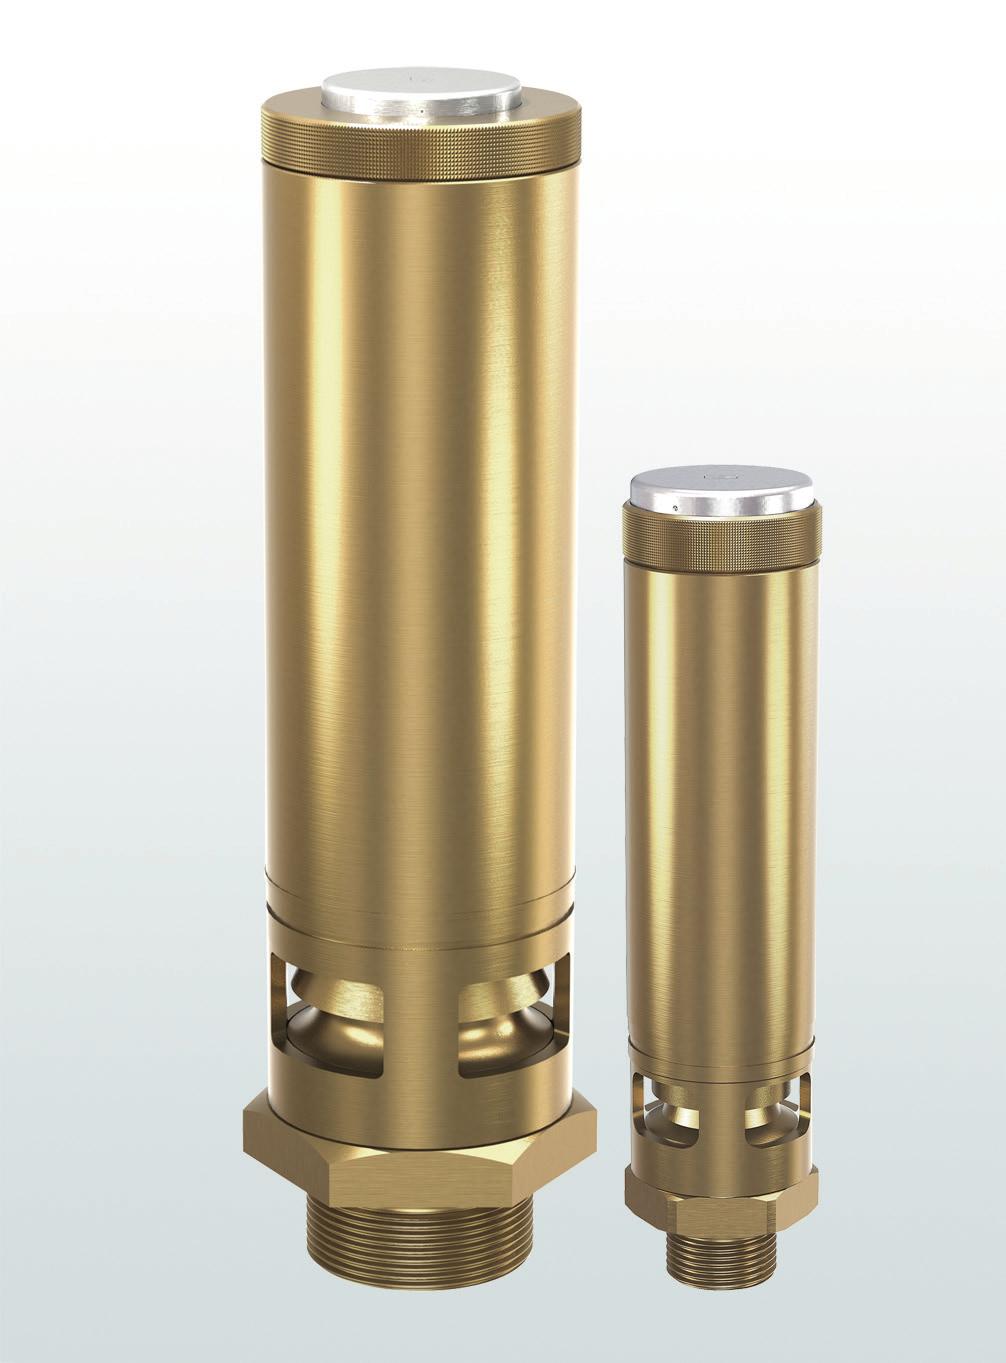 Type test approved atmospheric discharge safety valves for industrial applications Series 812 4.